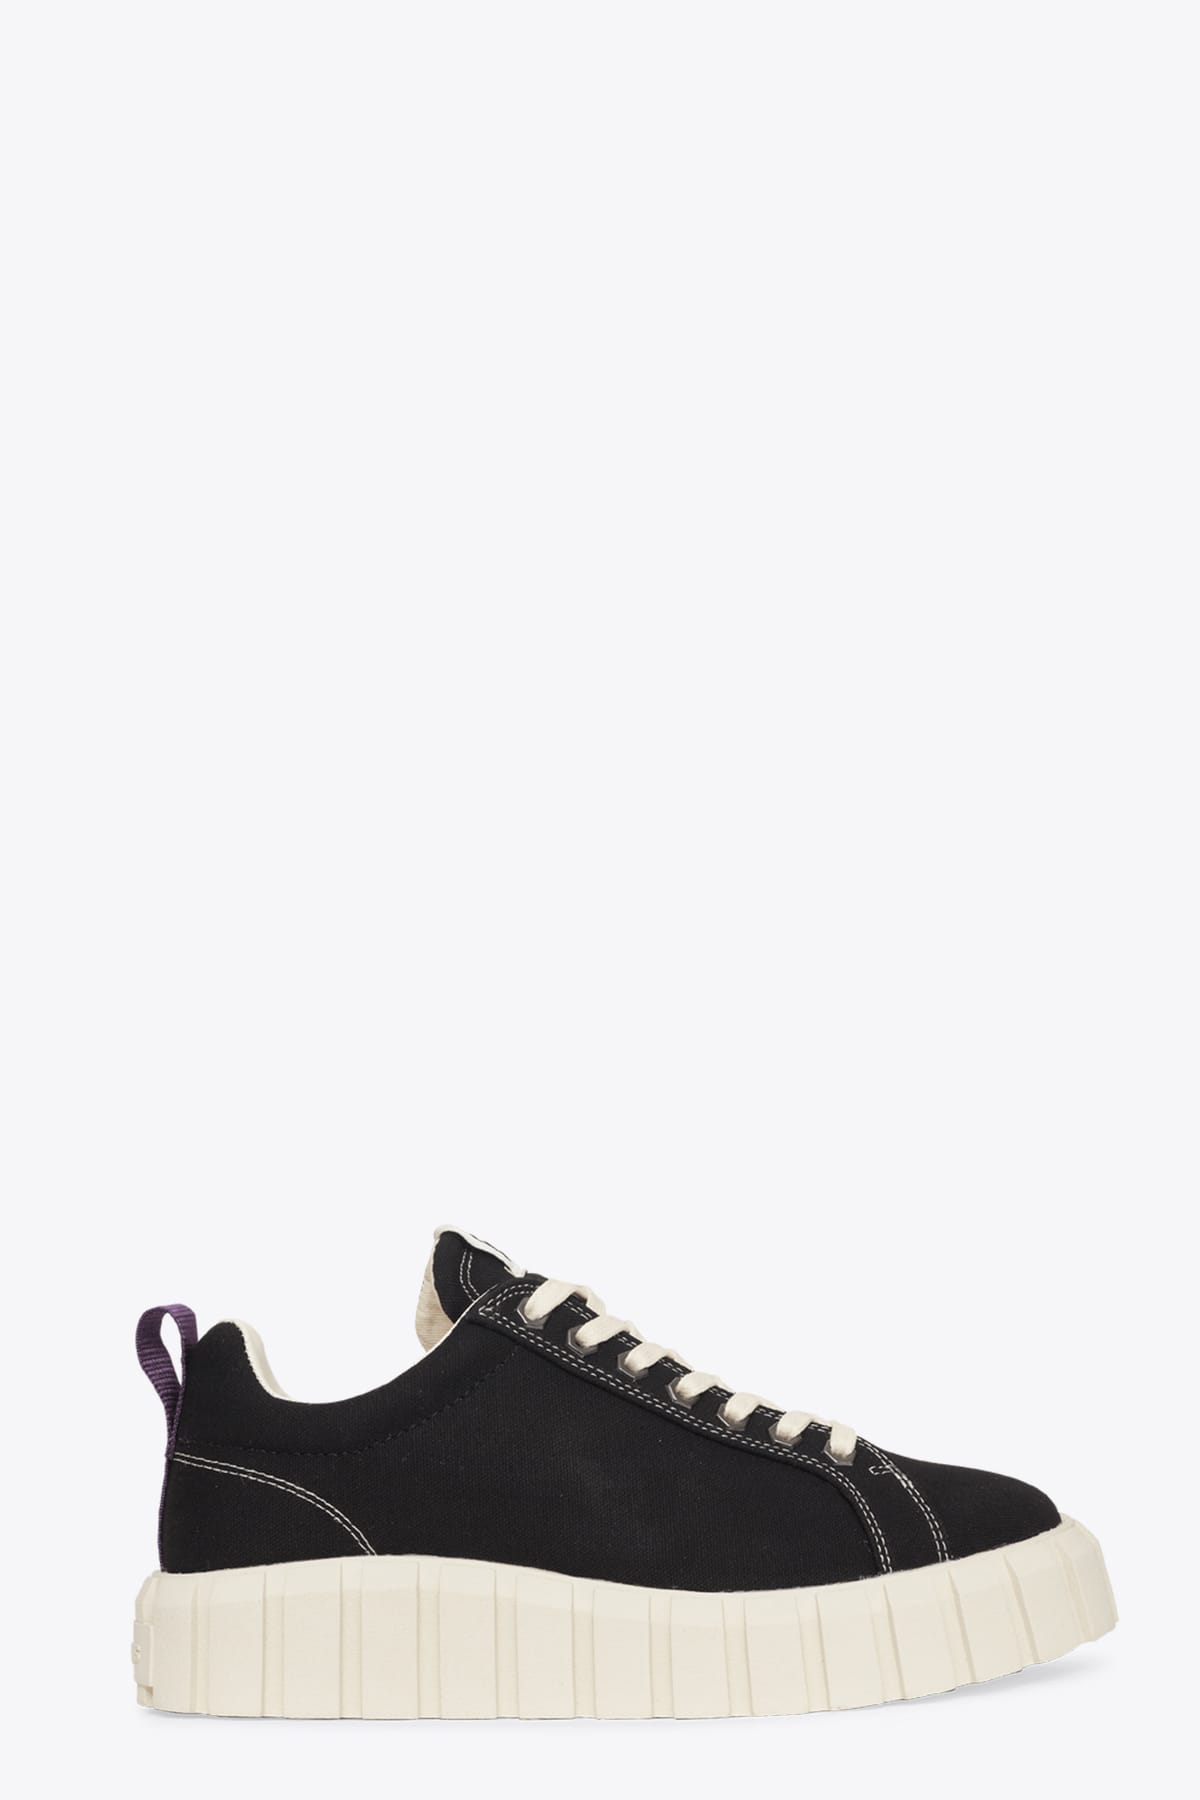 Eytys Black Canvas Lace-up Low Sneaker